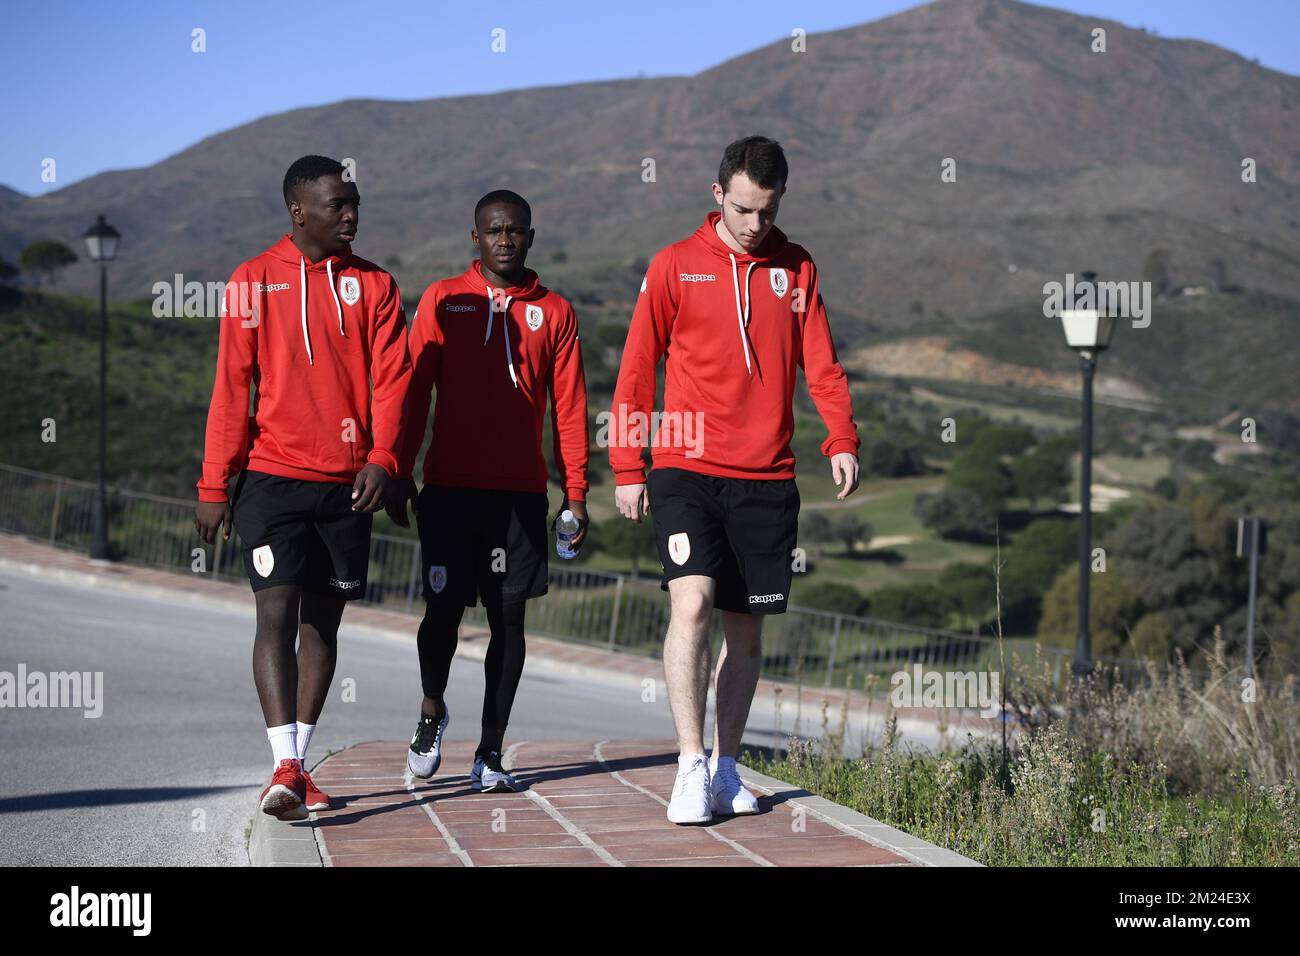 Standard's Ibrahima Bah pictured during the first day of the winter  training camp of Belgian first division soccer team Standard de Liege, in  Marbella, Spain, Sunday 08 January 2017. BELGA PHOTO YORICK